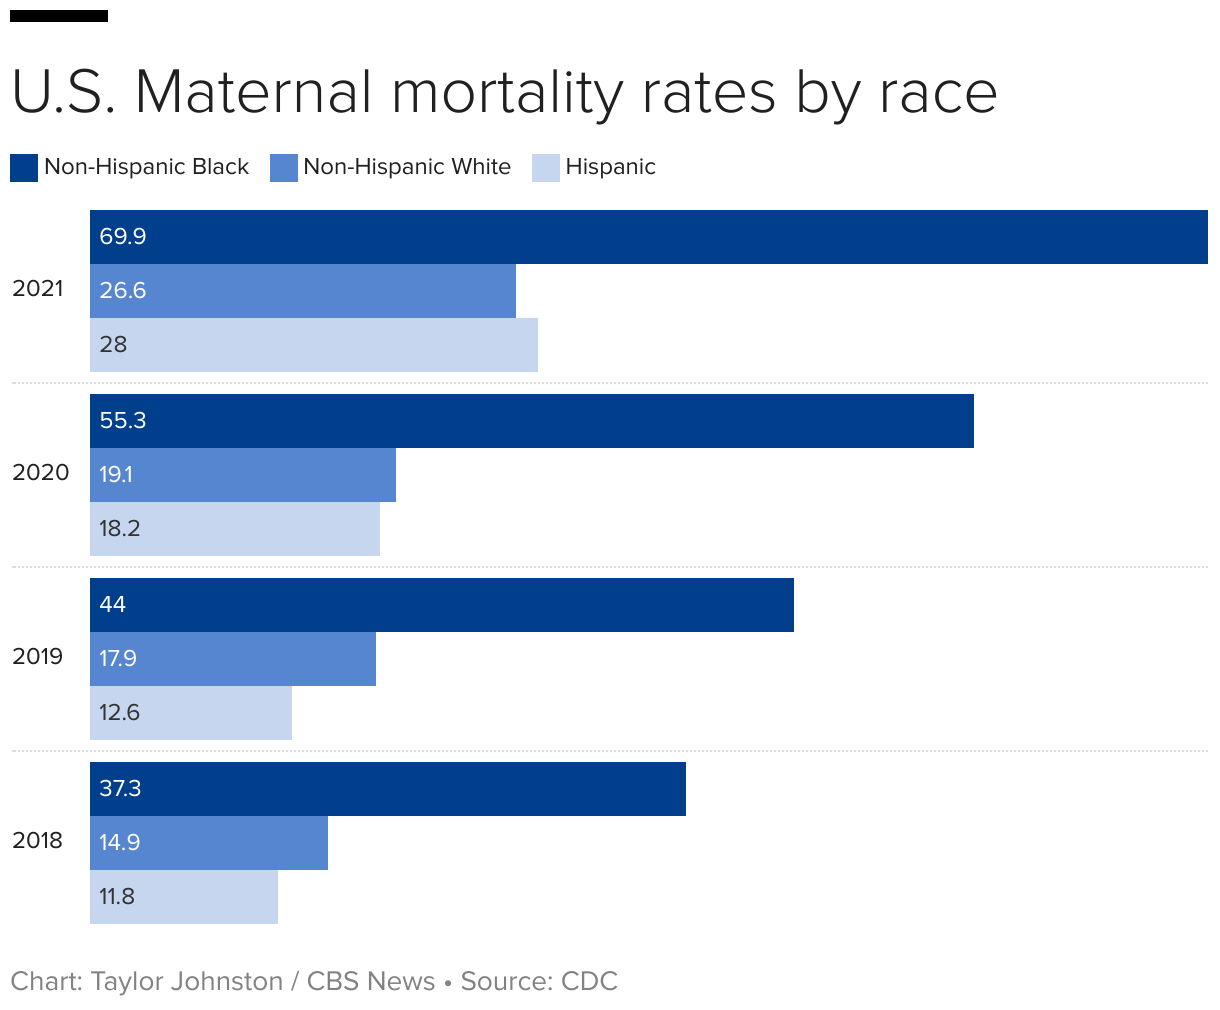 Group bar chart showing the maternal mortality rates by race from 2018 to 2021.